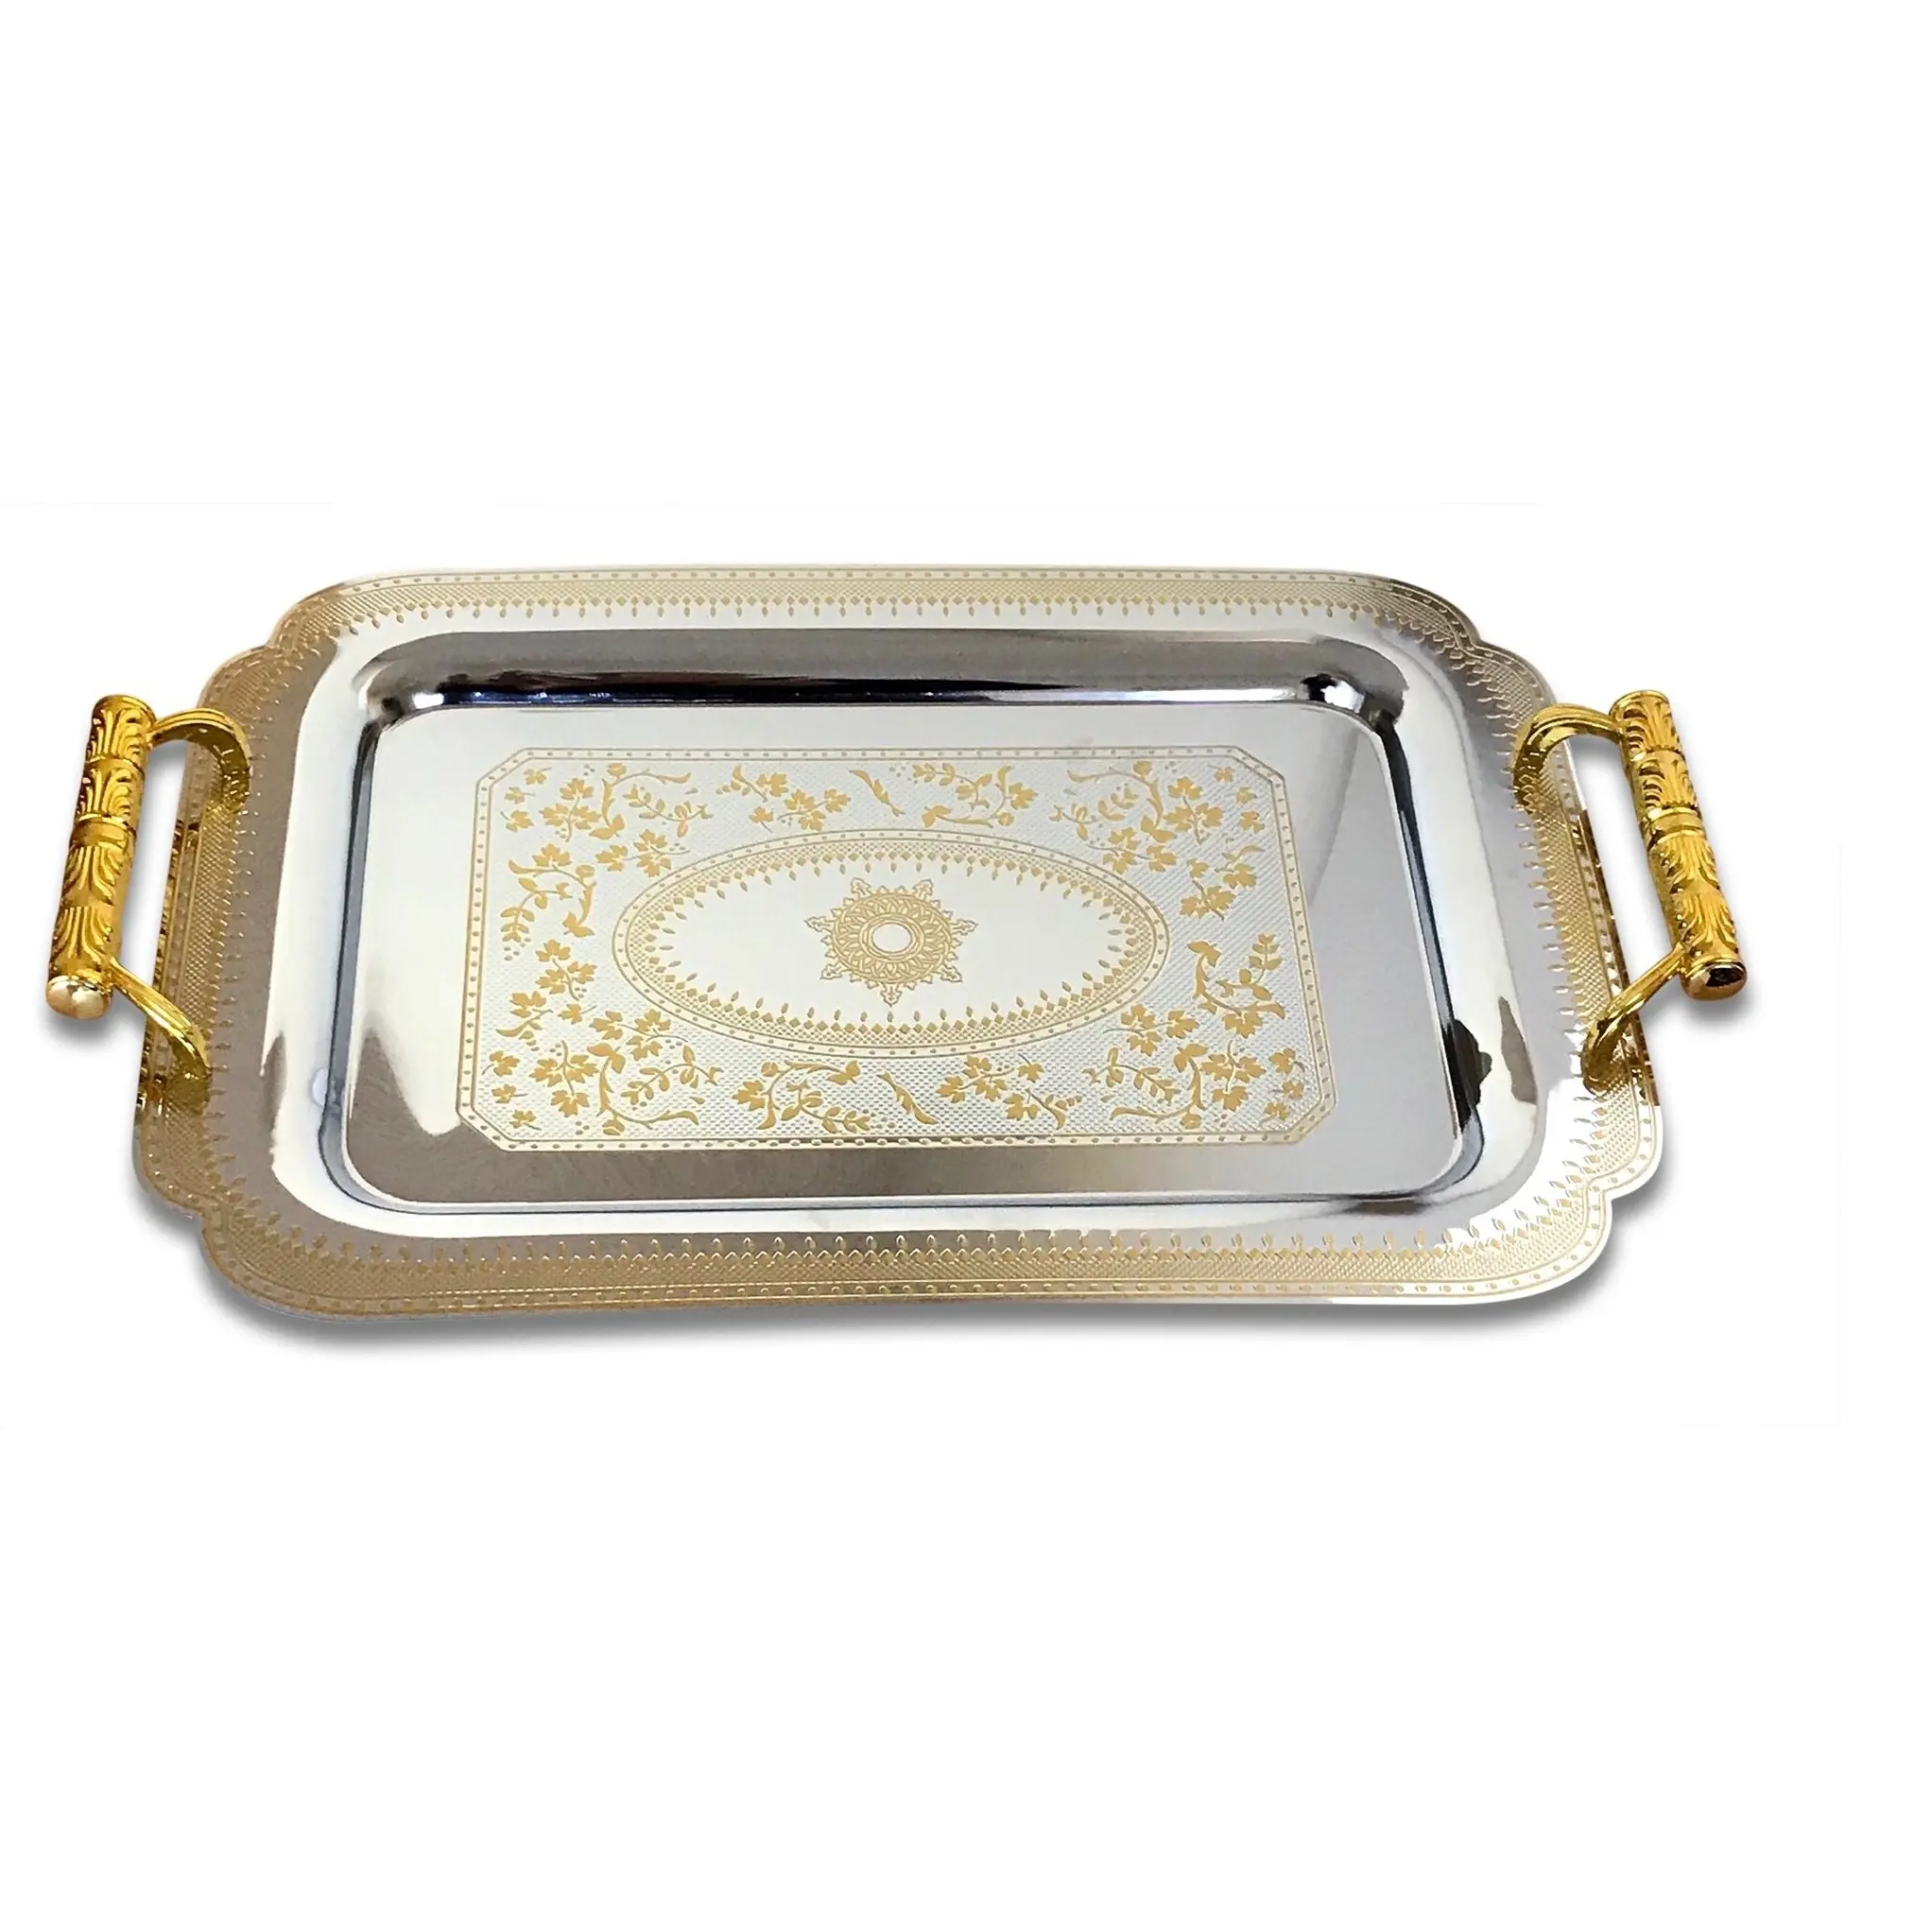 Home Decor Serving Tray Solid Metal Decorative Trays Use By Home Restaurant And Hotel Decor Custom Design Available